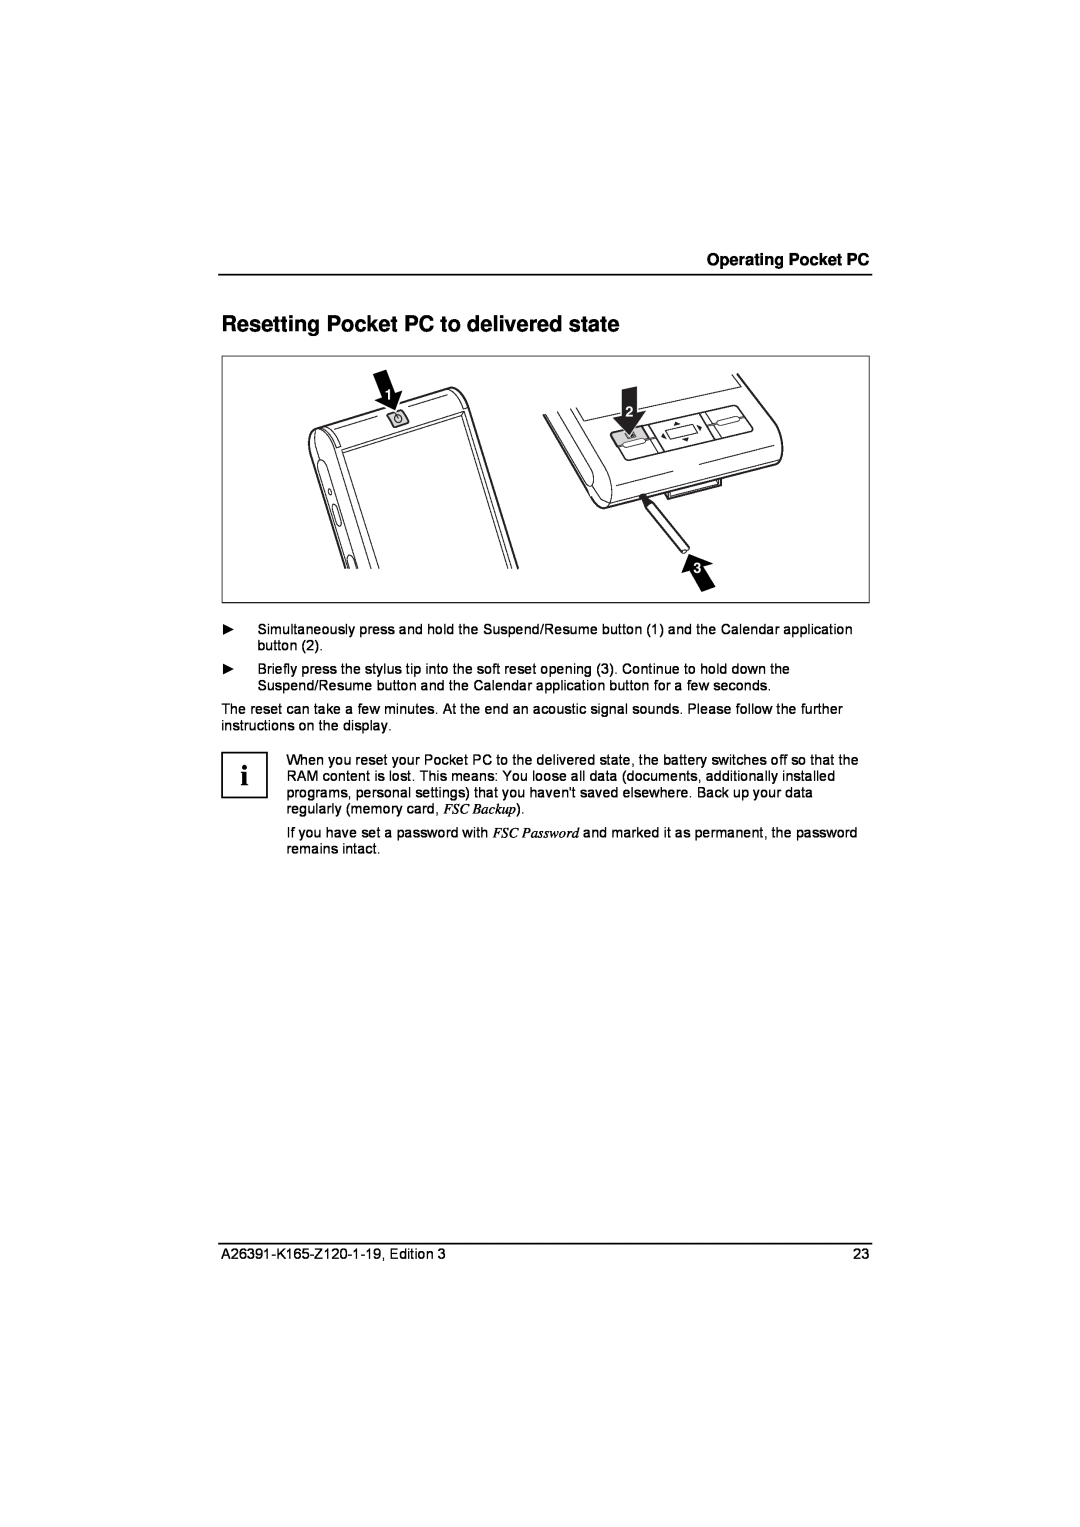 Zweita  Co N/C Series manual Resetting Pocket PC to delivered state, Operating Pocket PC 